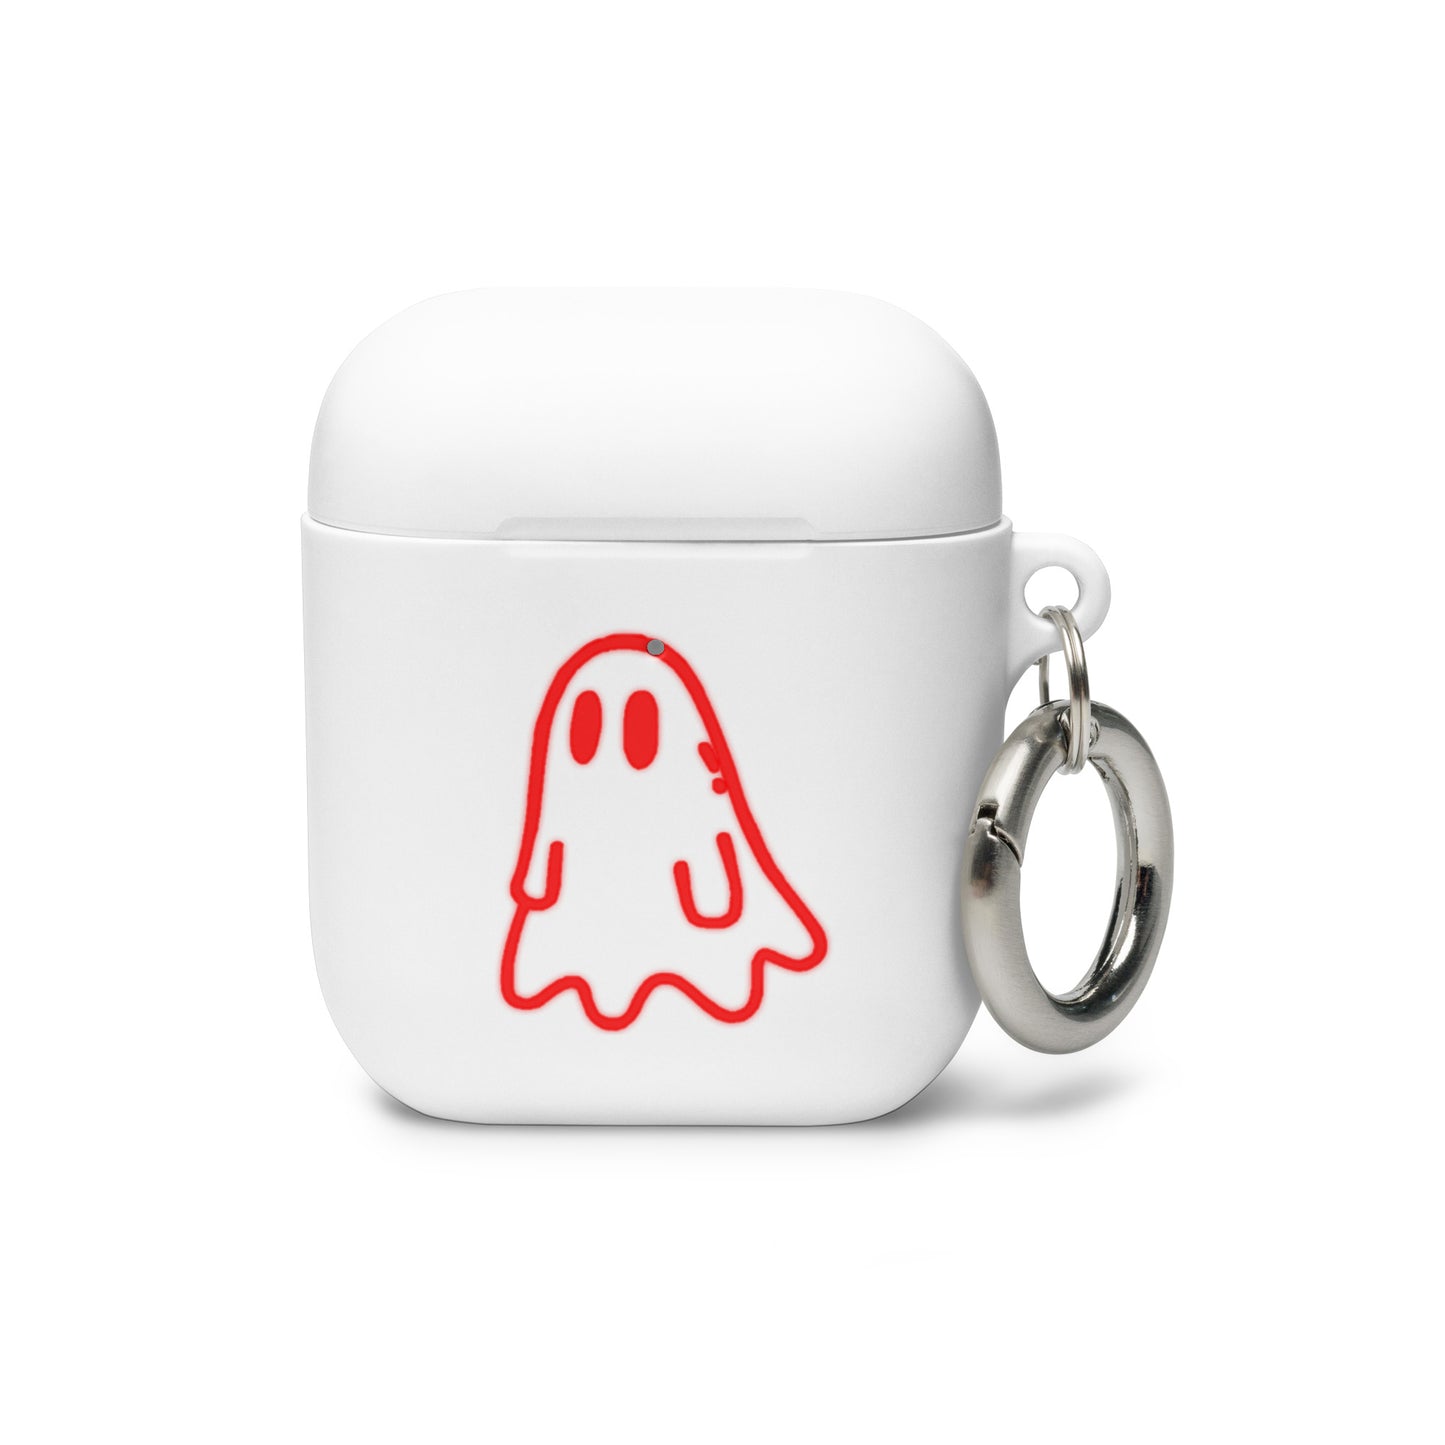 The General Store Ghost AirPod and AirPod Pro Case